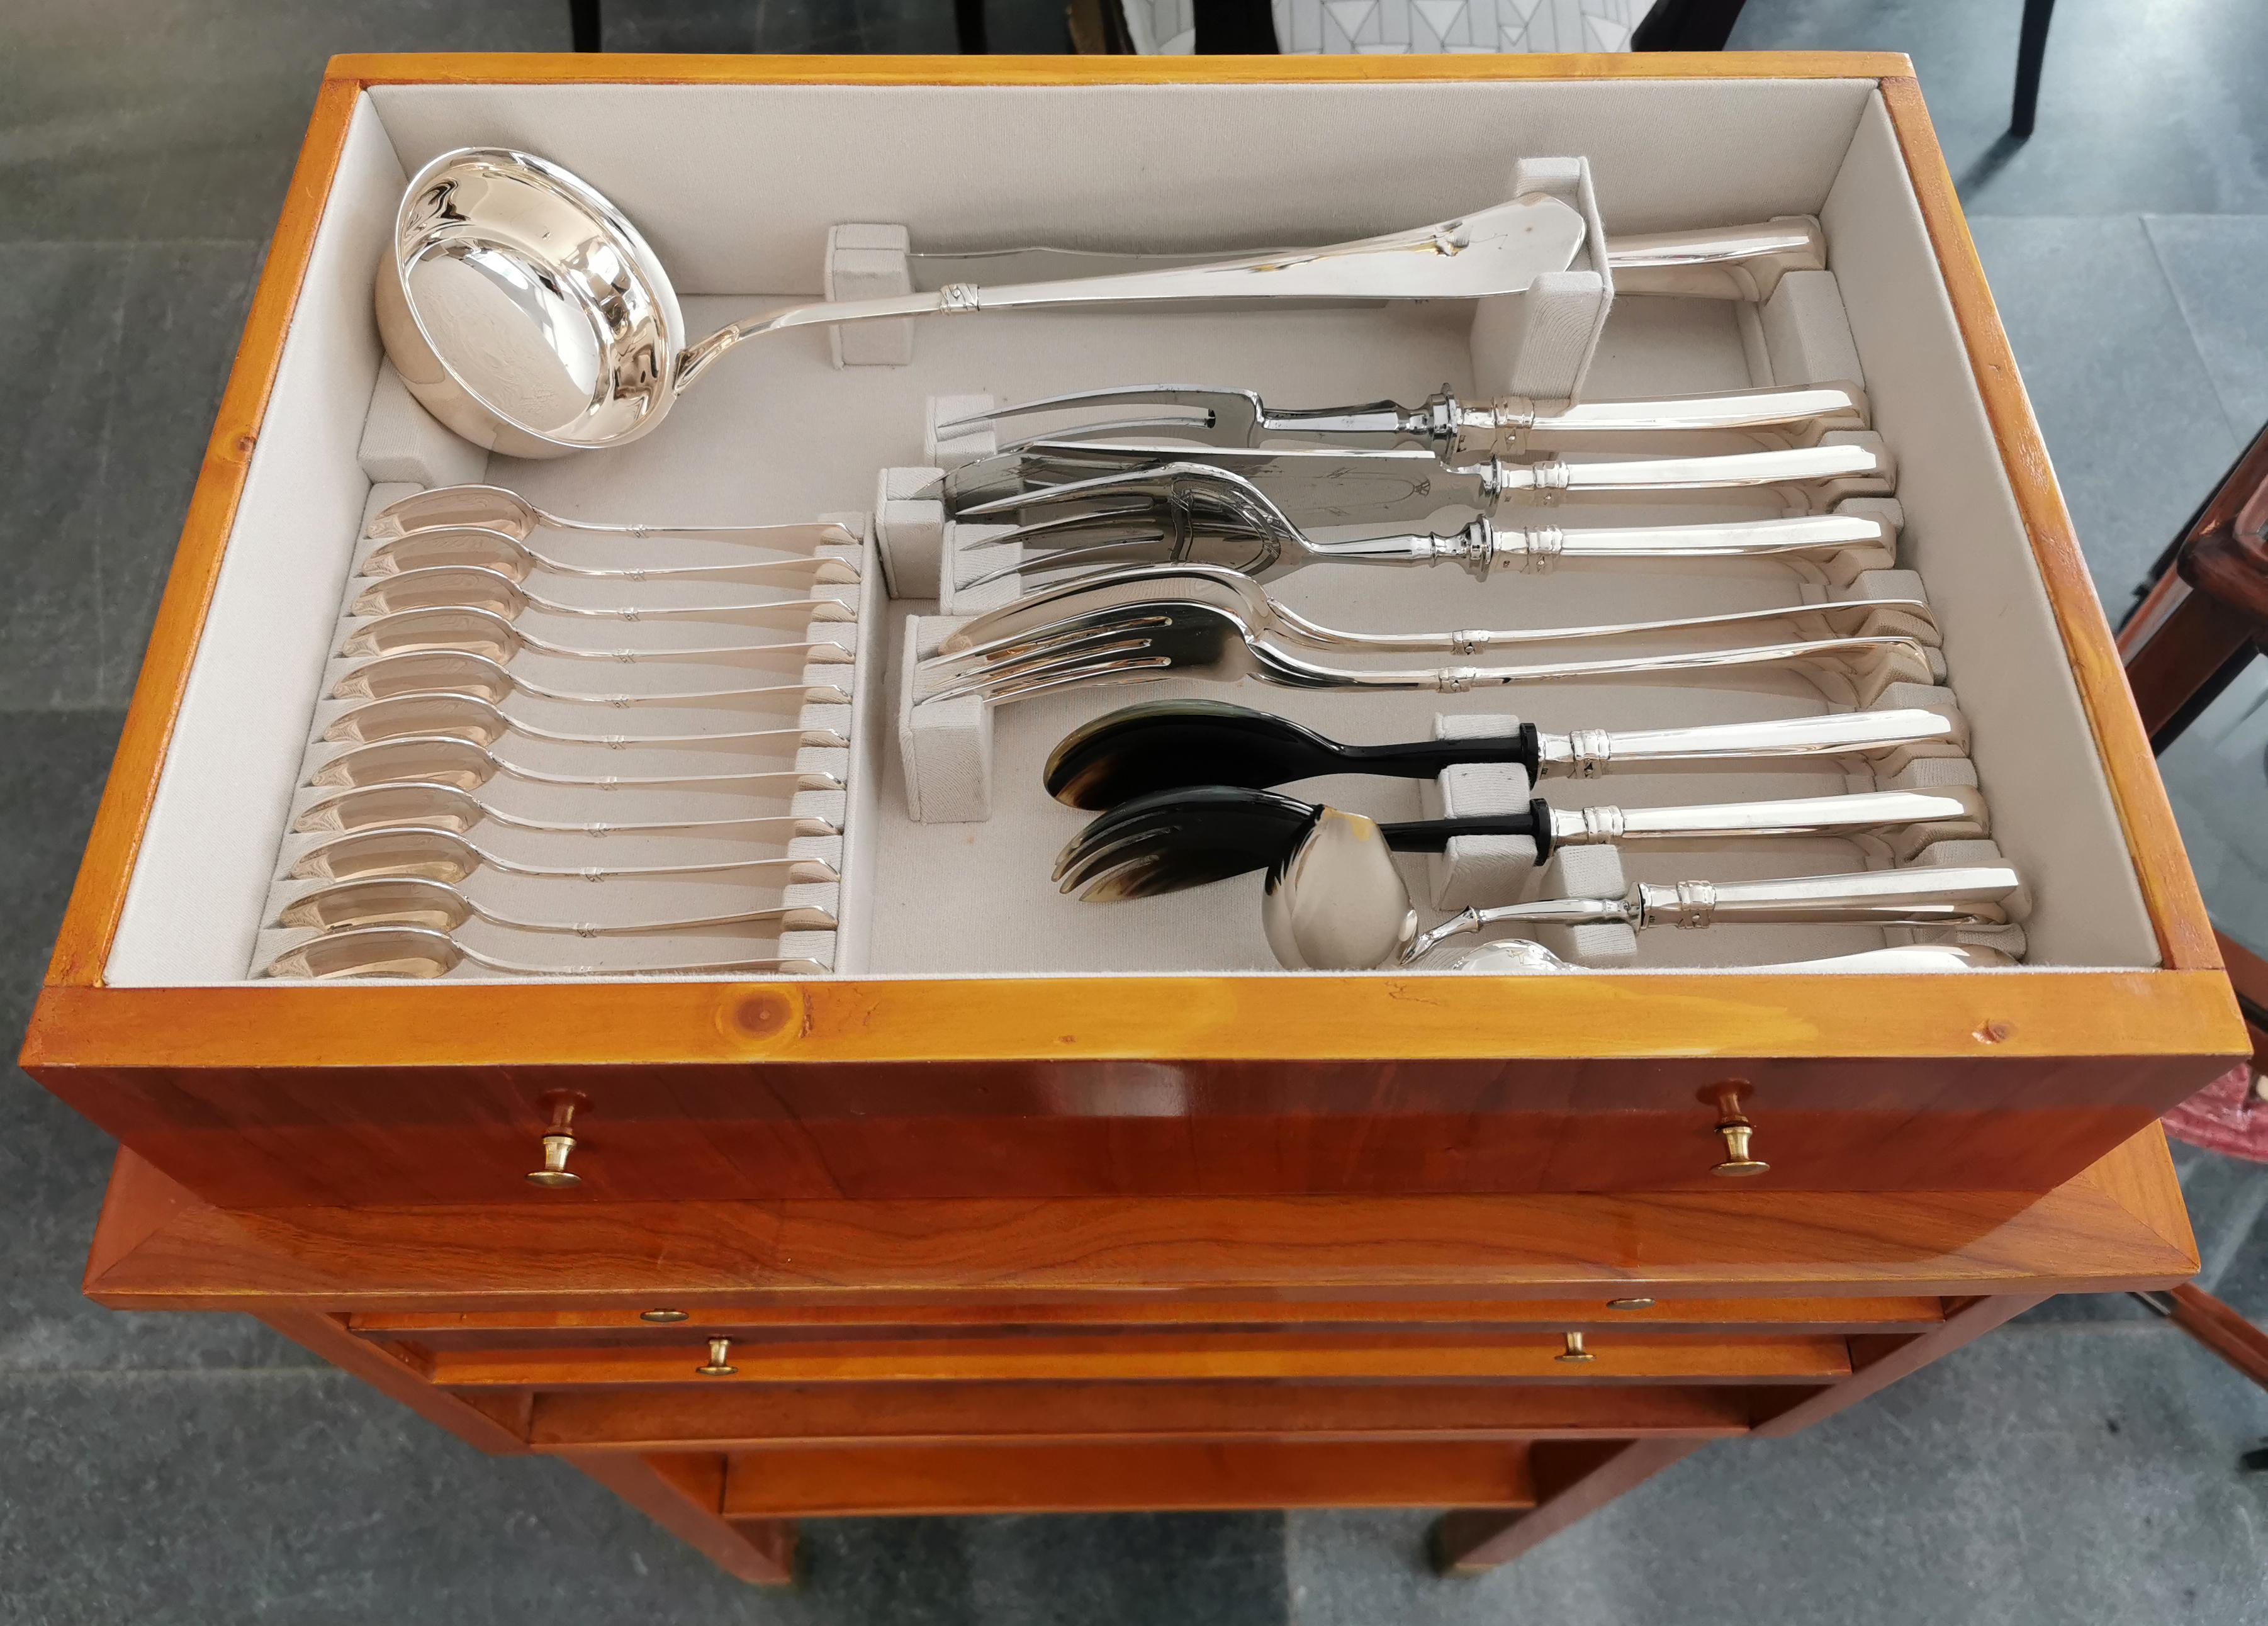 Art Nouveau Silver Cutlery Set for 12 People in Showcase VSF Duesseldorf Germany 1